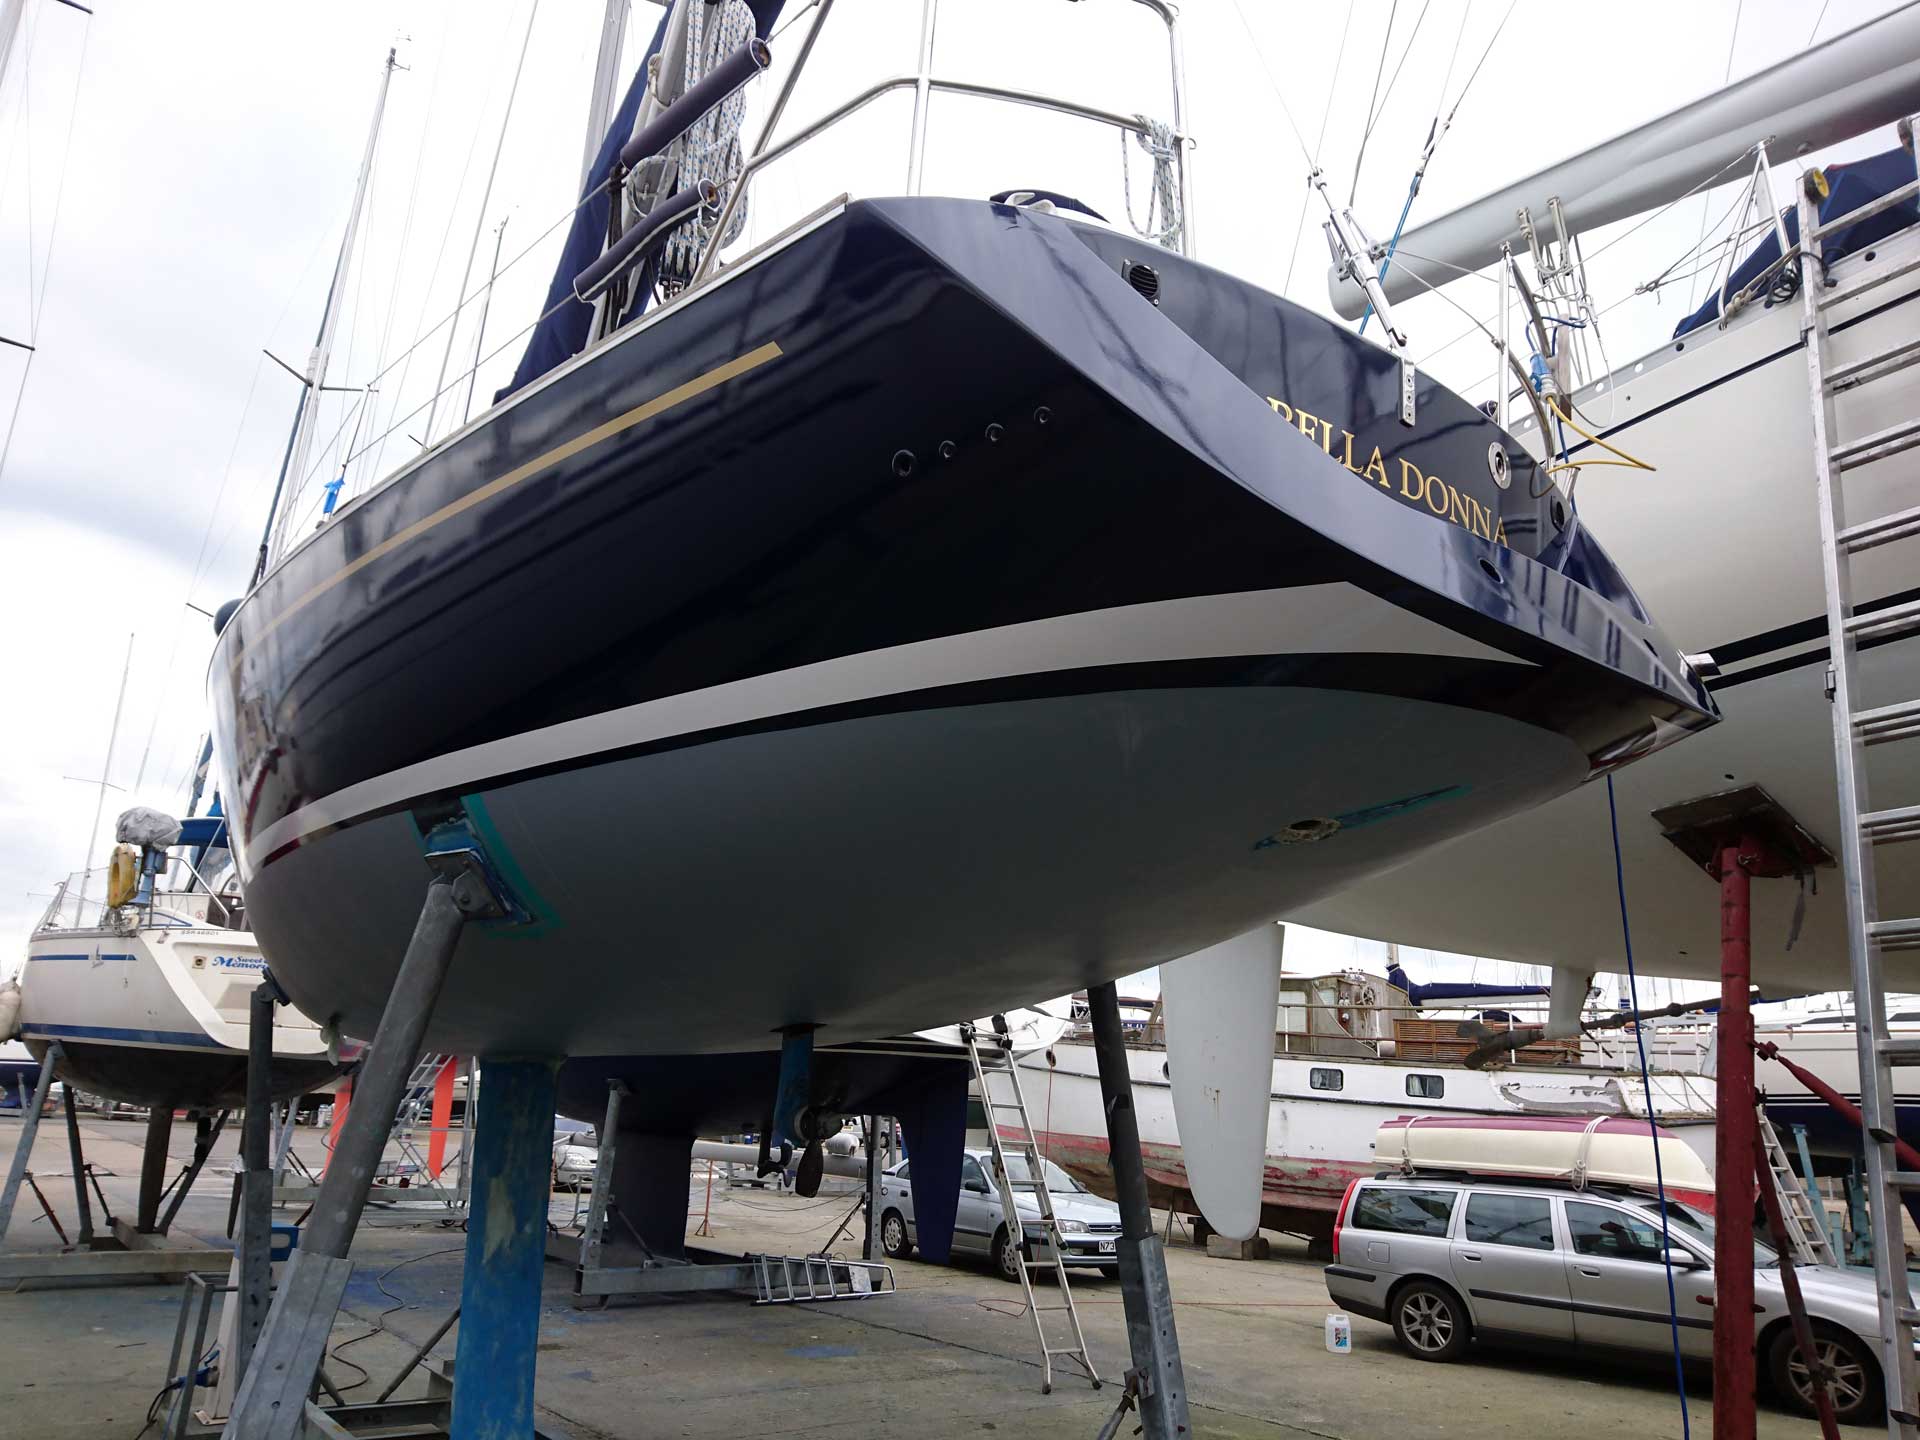 Brand new stripes + boat name have been installed over the top of this freshly wrapped sailing yacht hull.